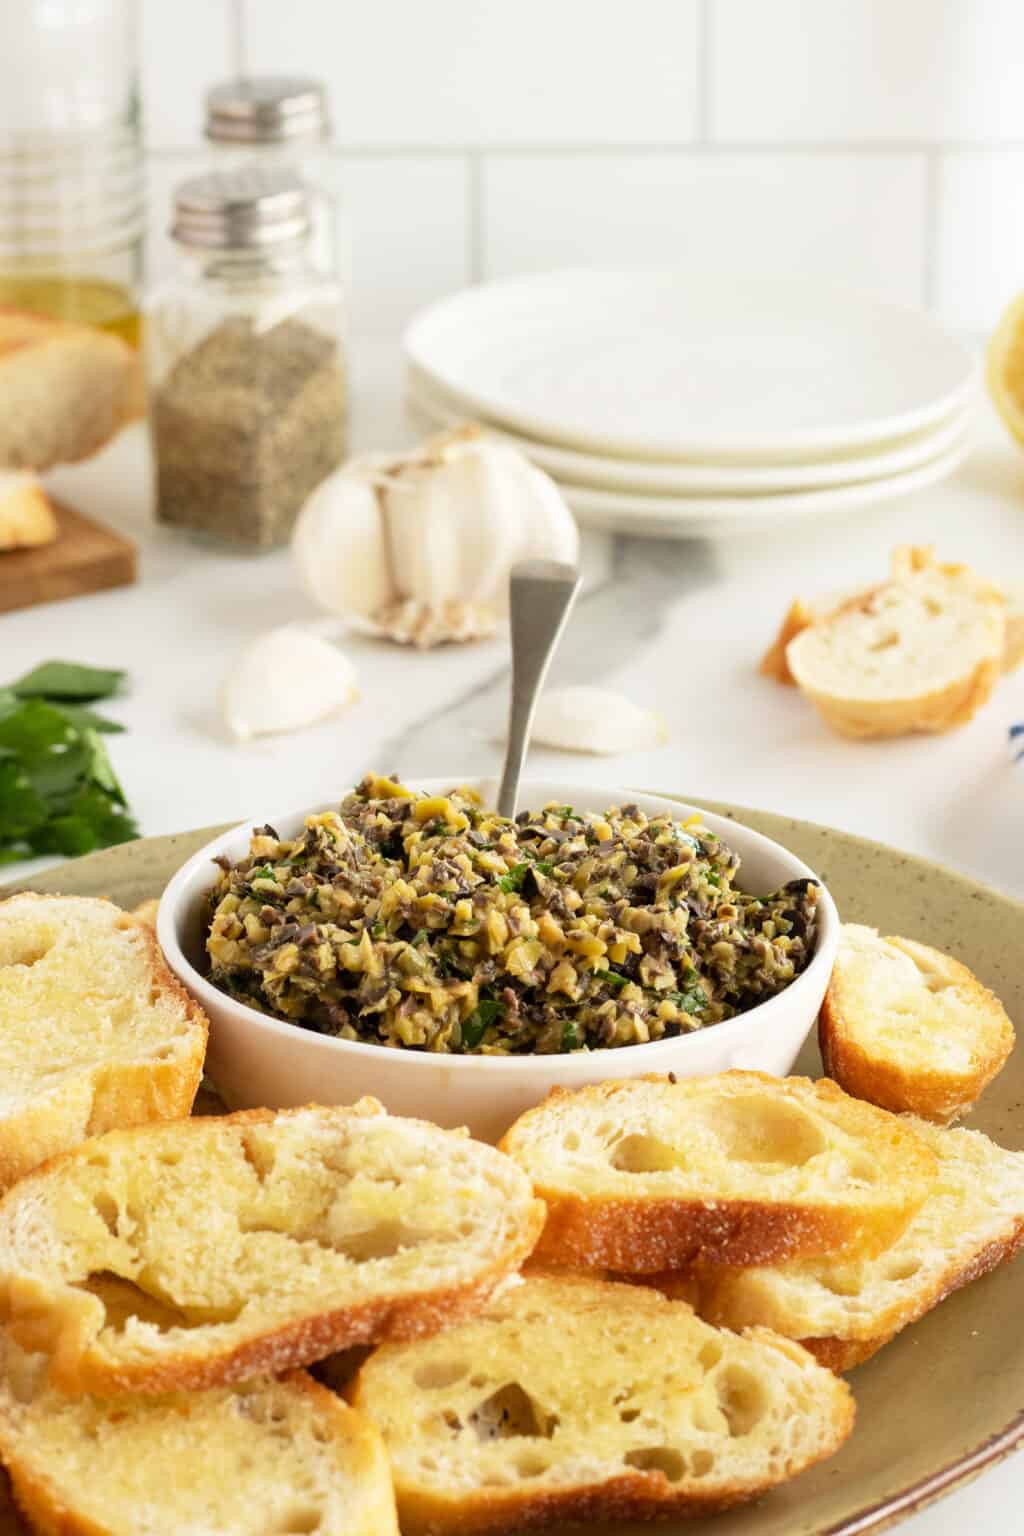 Tapenade - The Kitchen Magpie